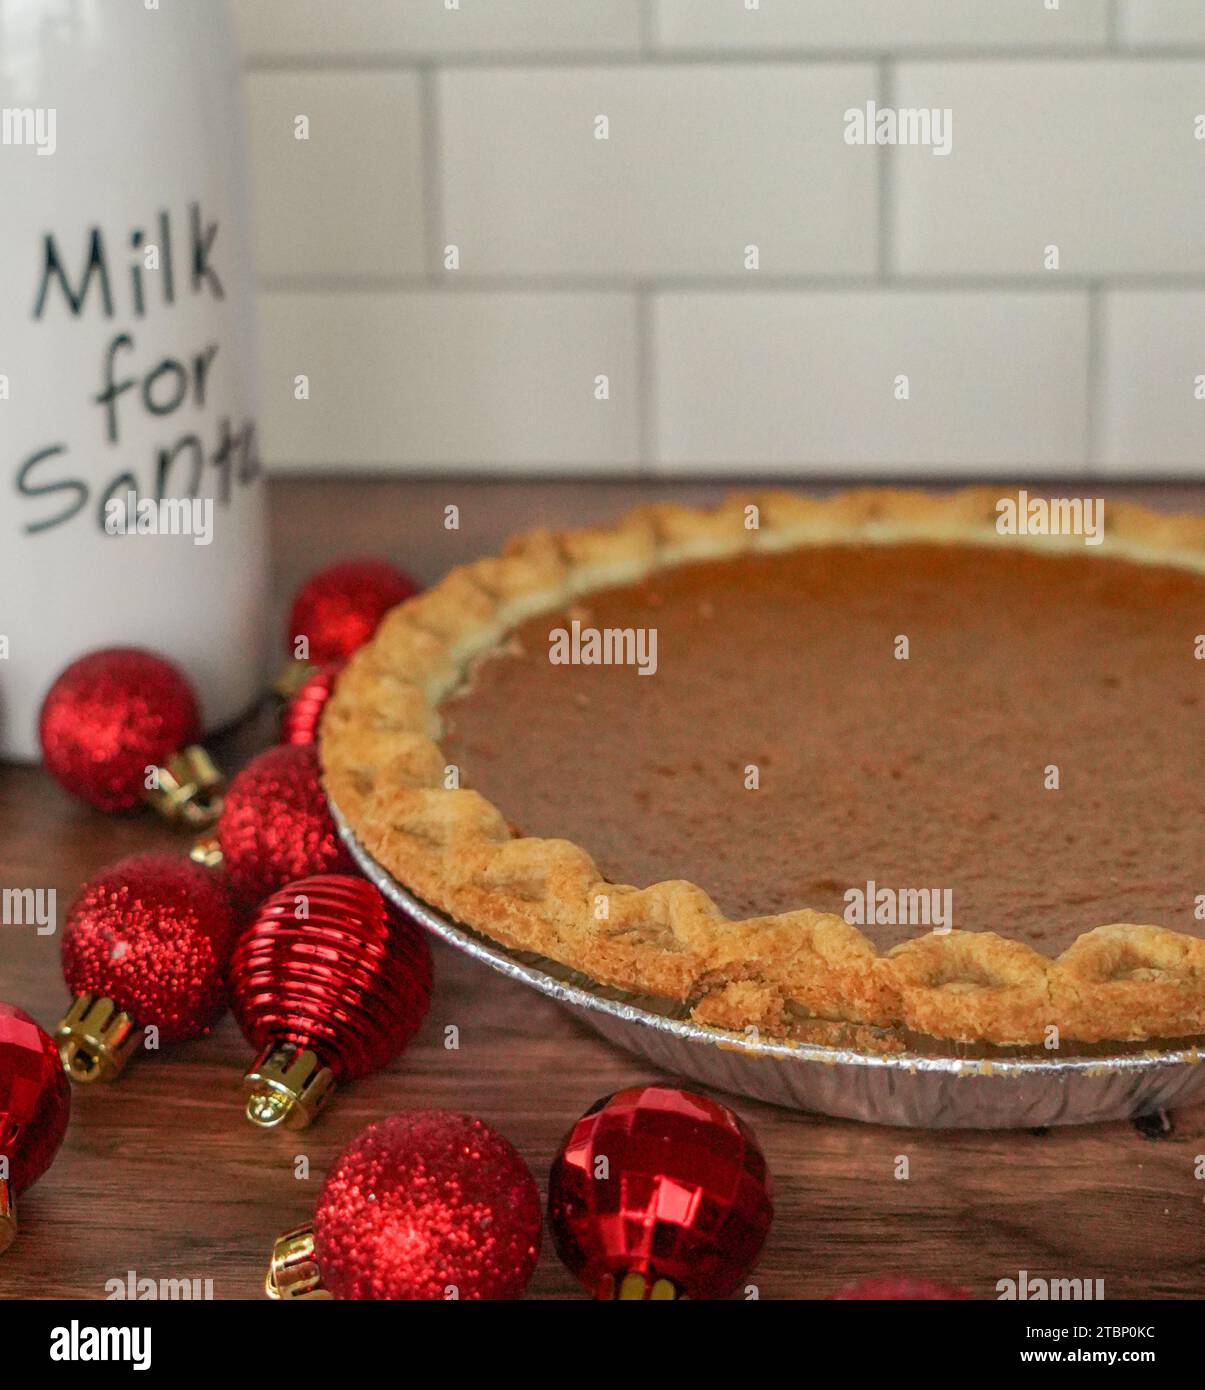 Close up of pumpkin pie with a bottle of Milk for Santa Stock Photo